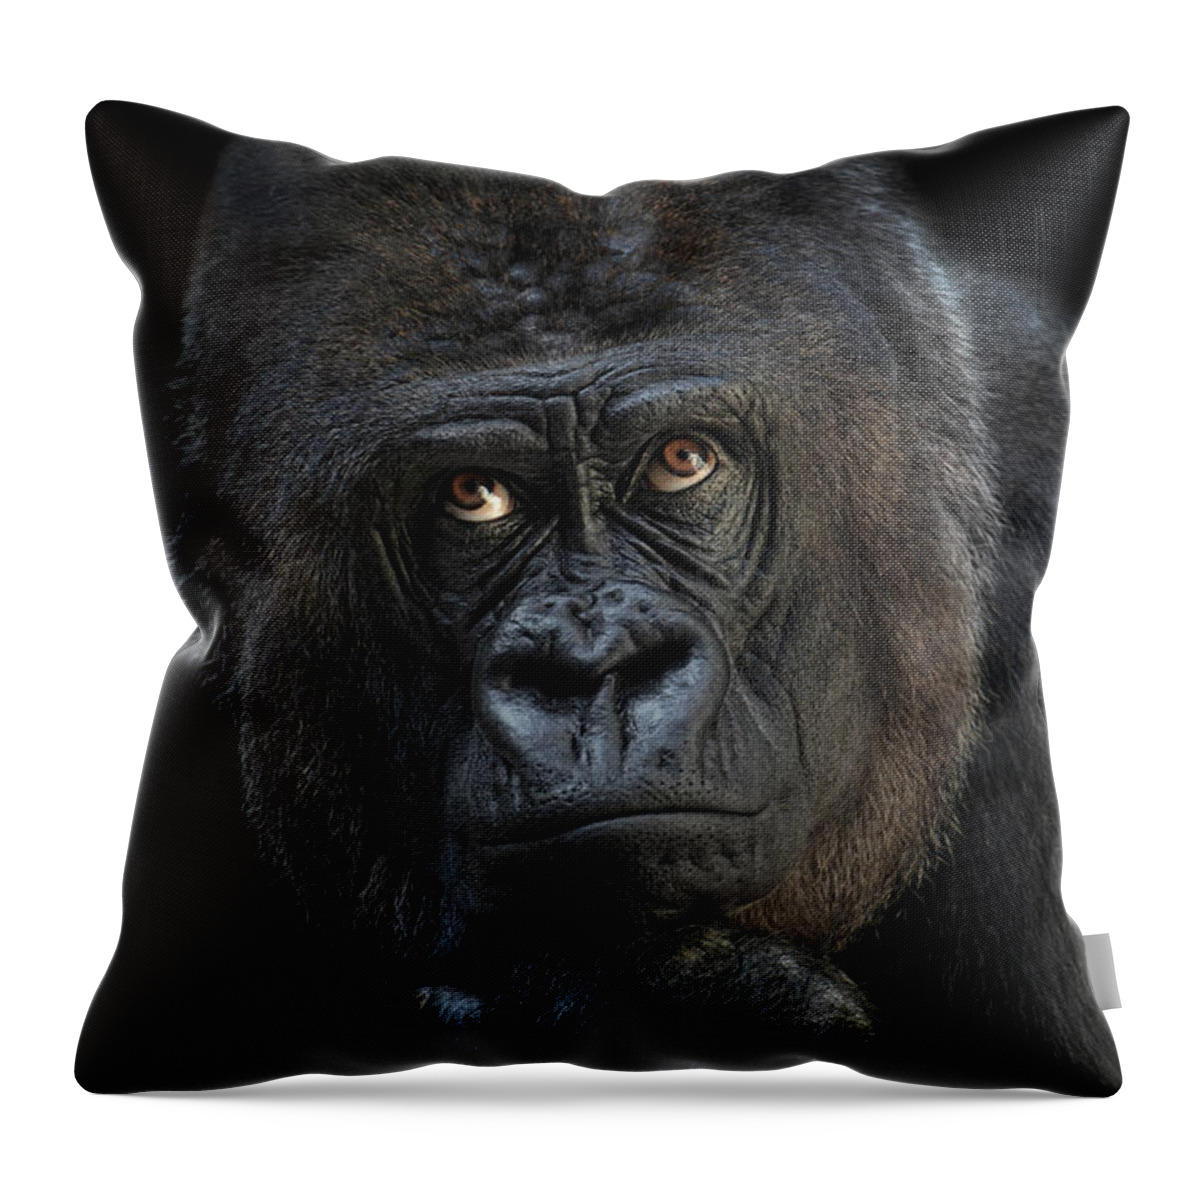 Animal Throw Pillow featuring the photograph Looking Up by Joachim G Pinkawa